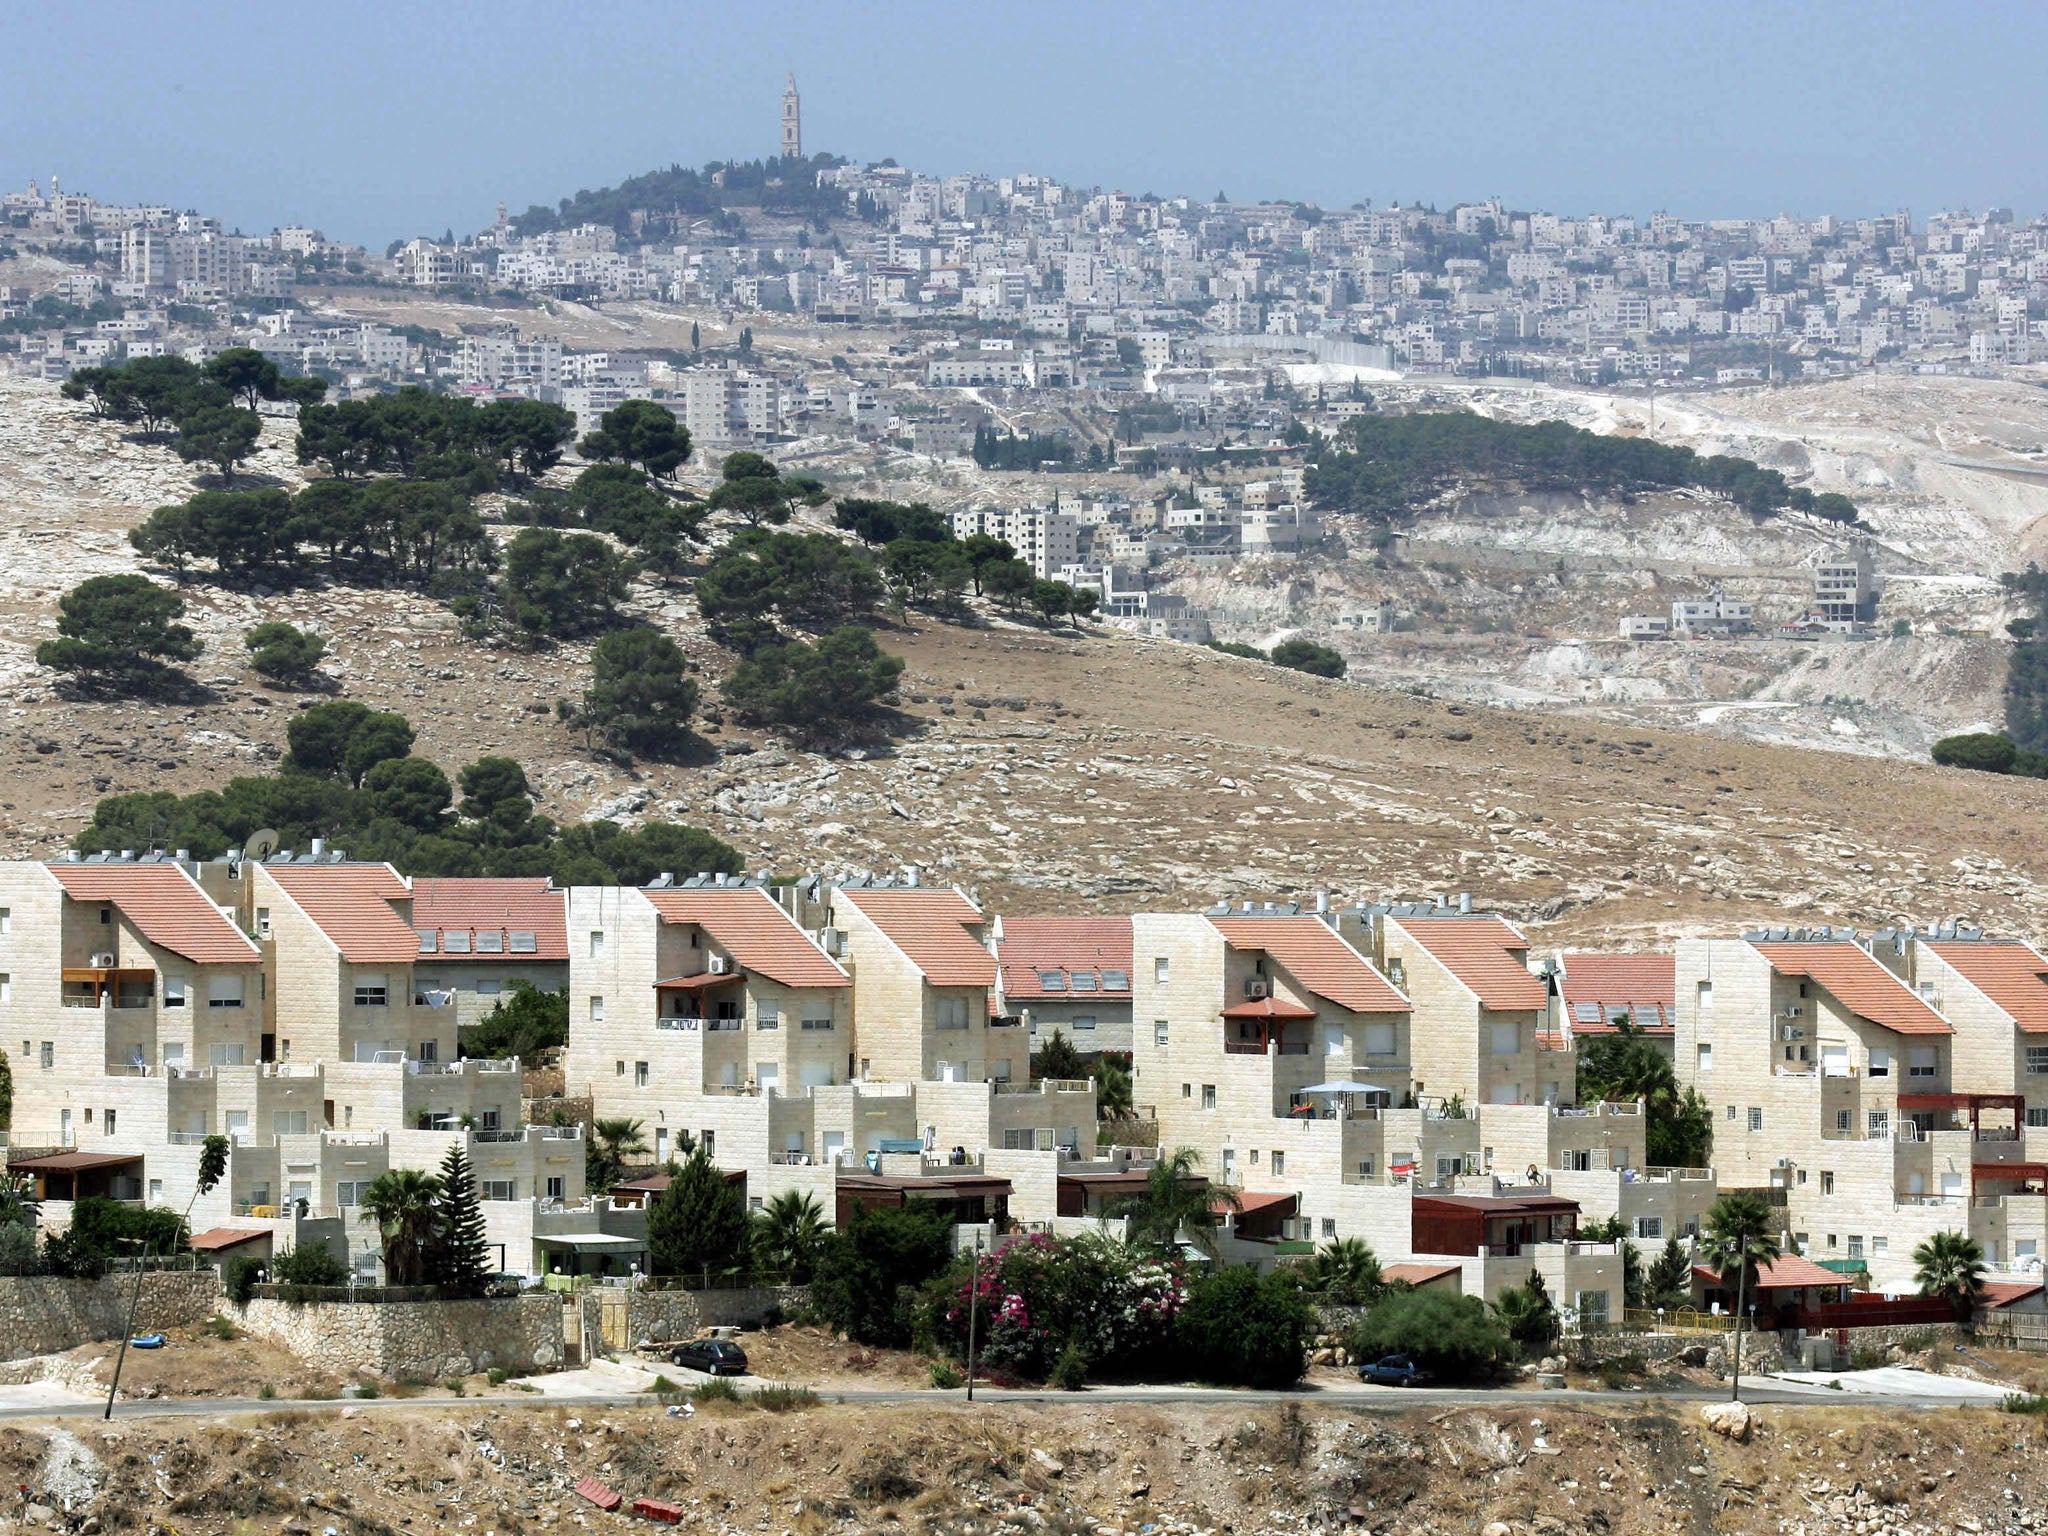 Israel could be about to embark on a major building project in West Bank